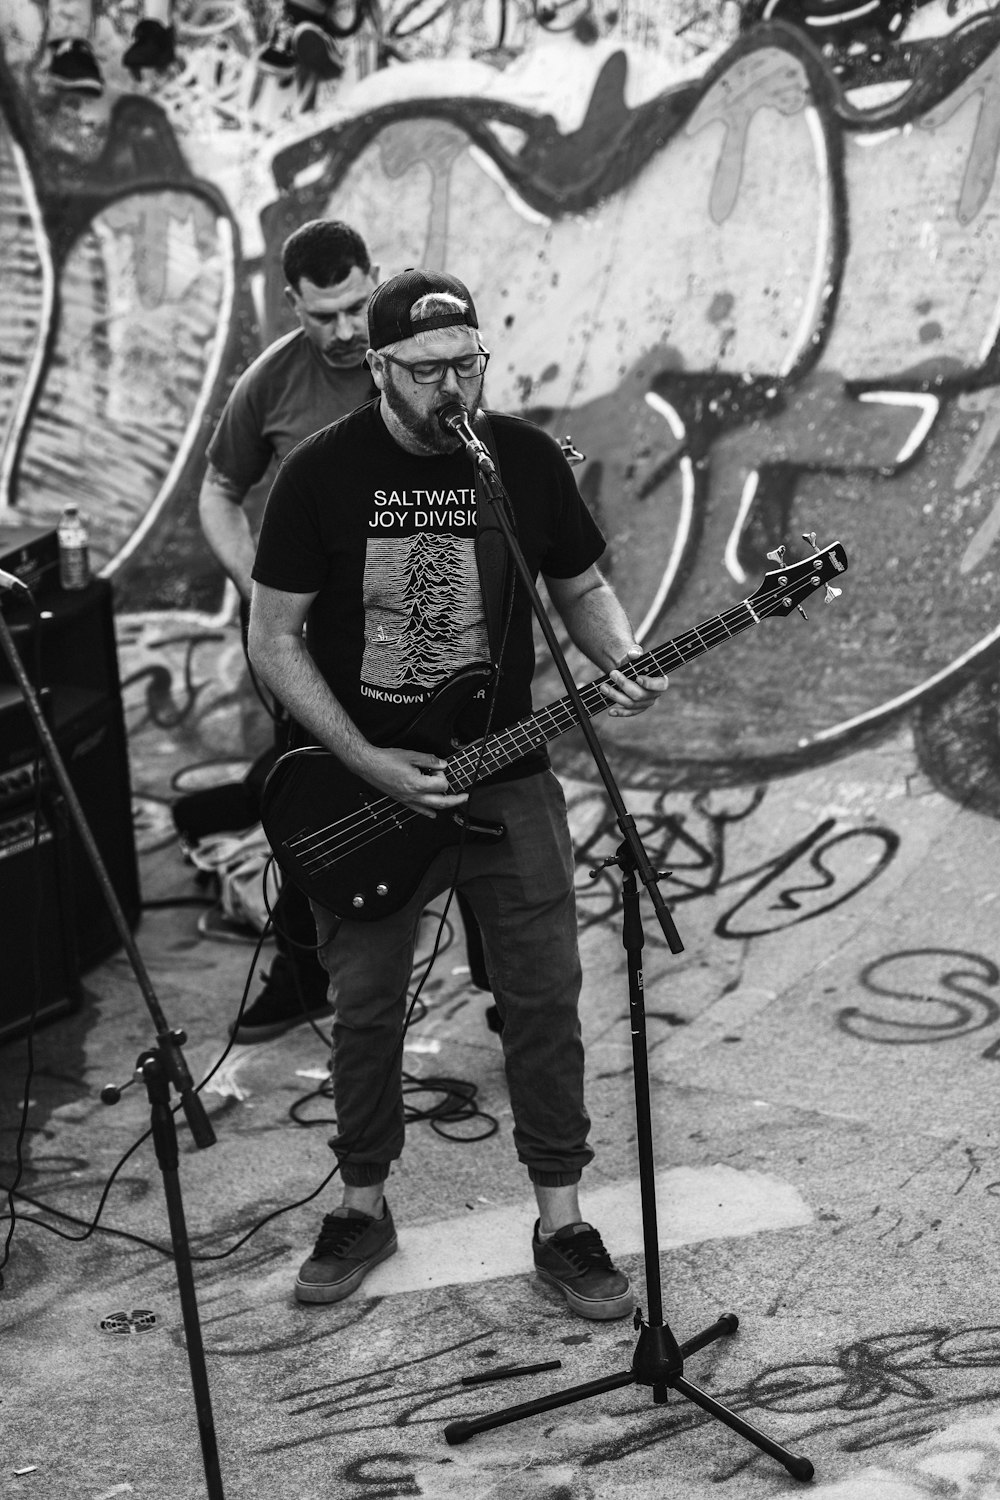 a man playing a guitar in front of a wall with graffiti